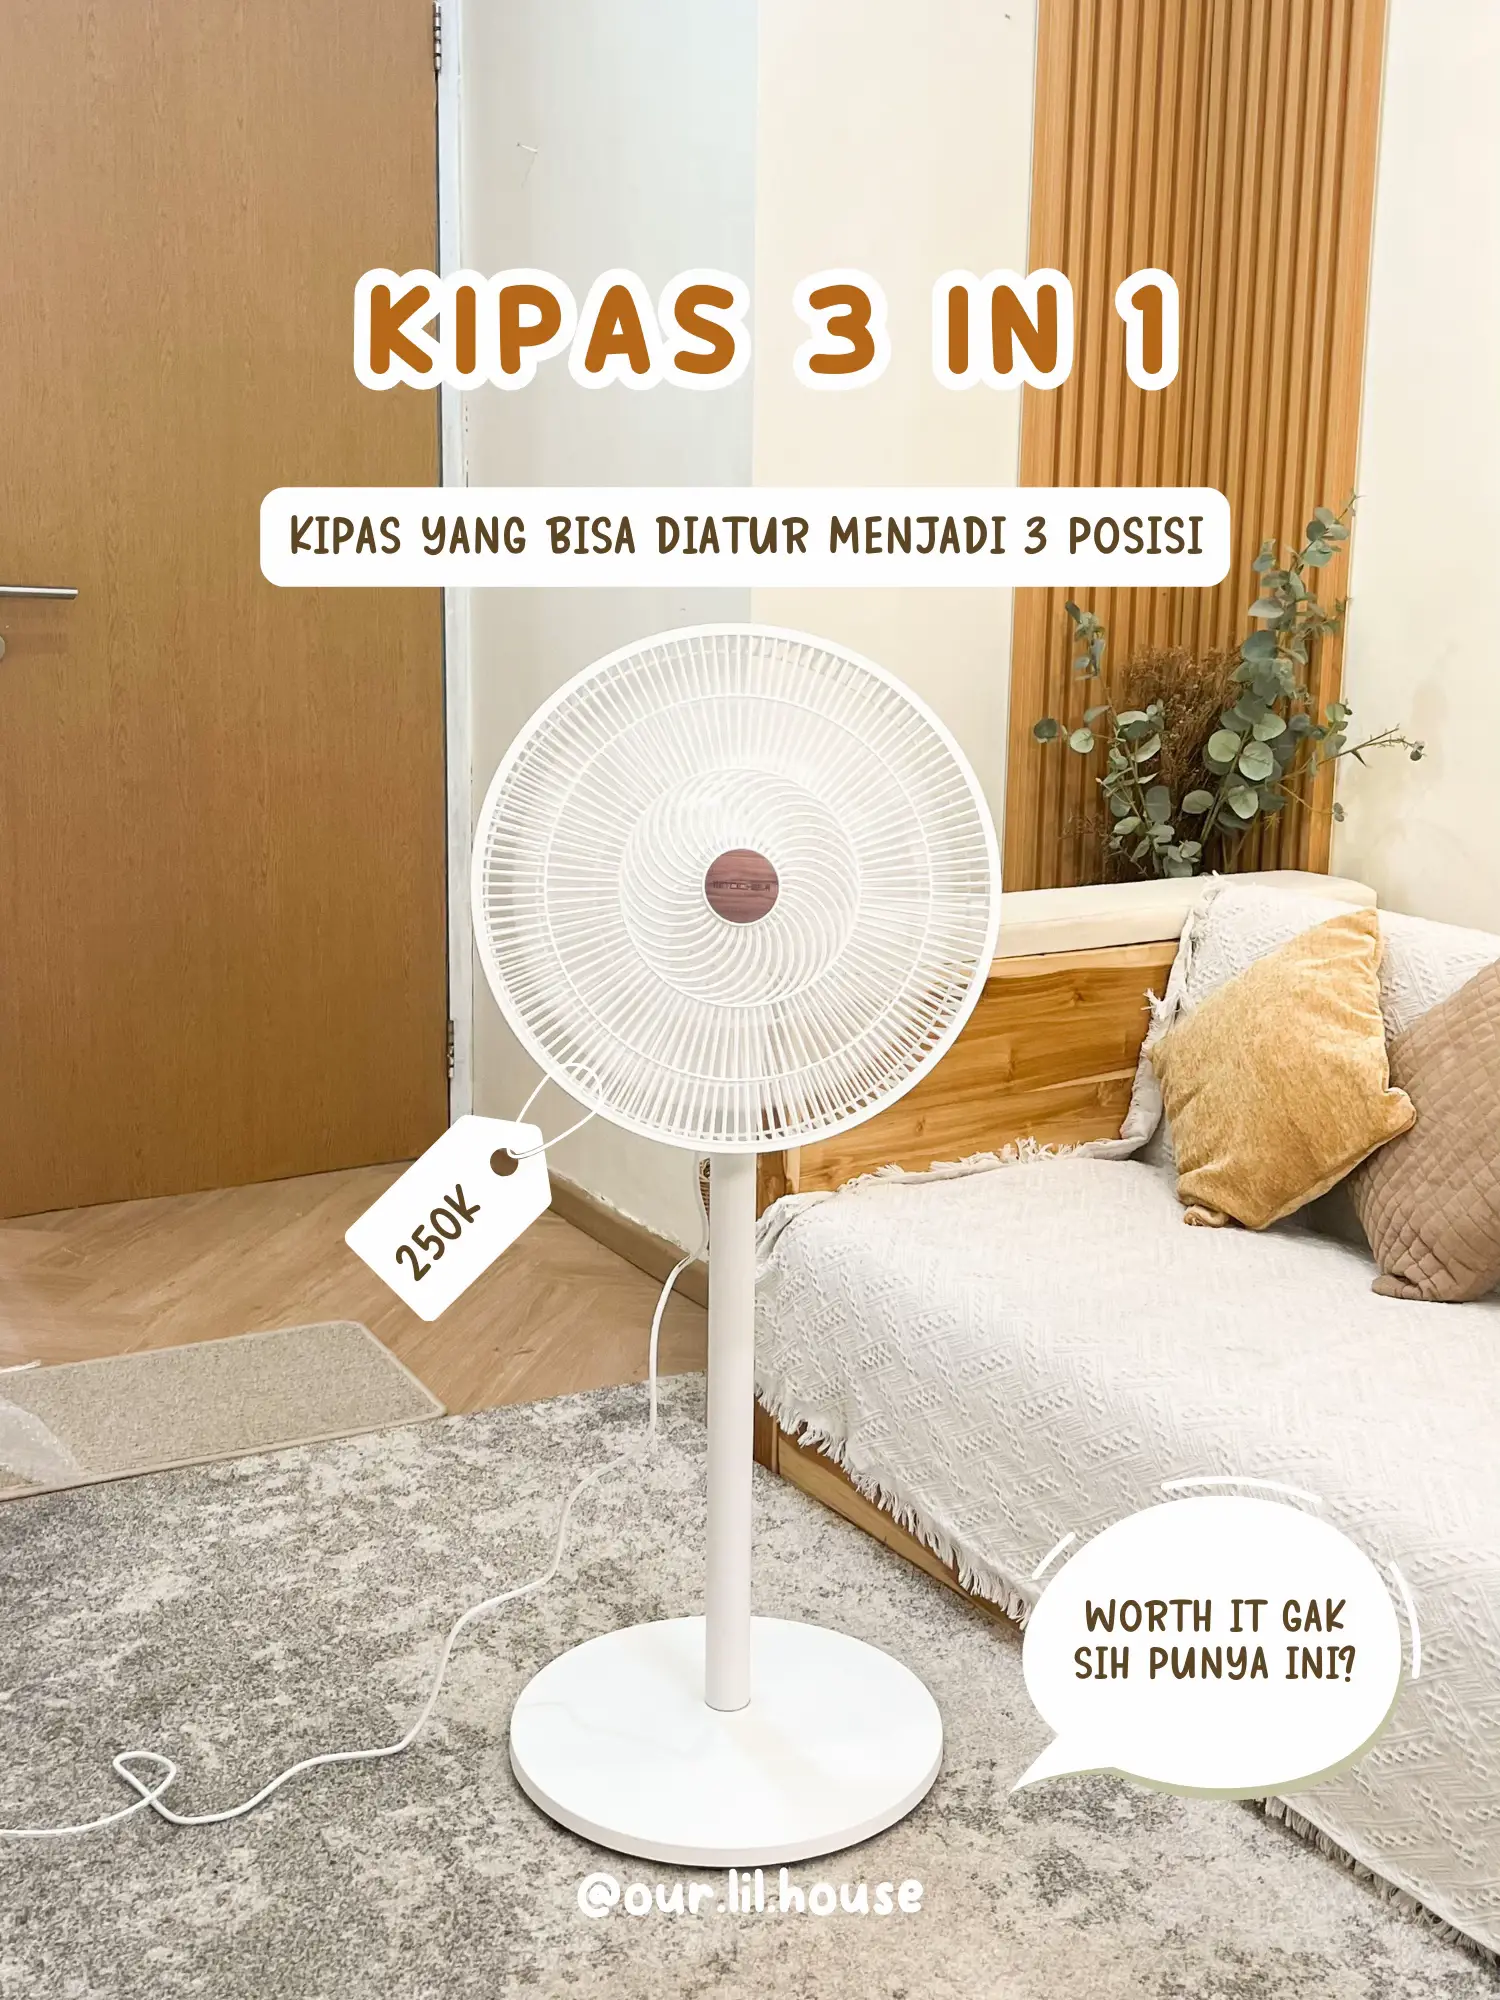 The Latest Version of Kipas Guys is HERE!